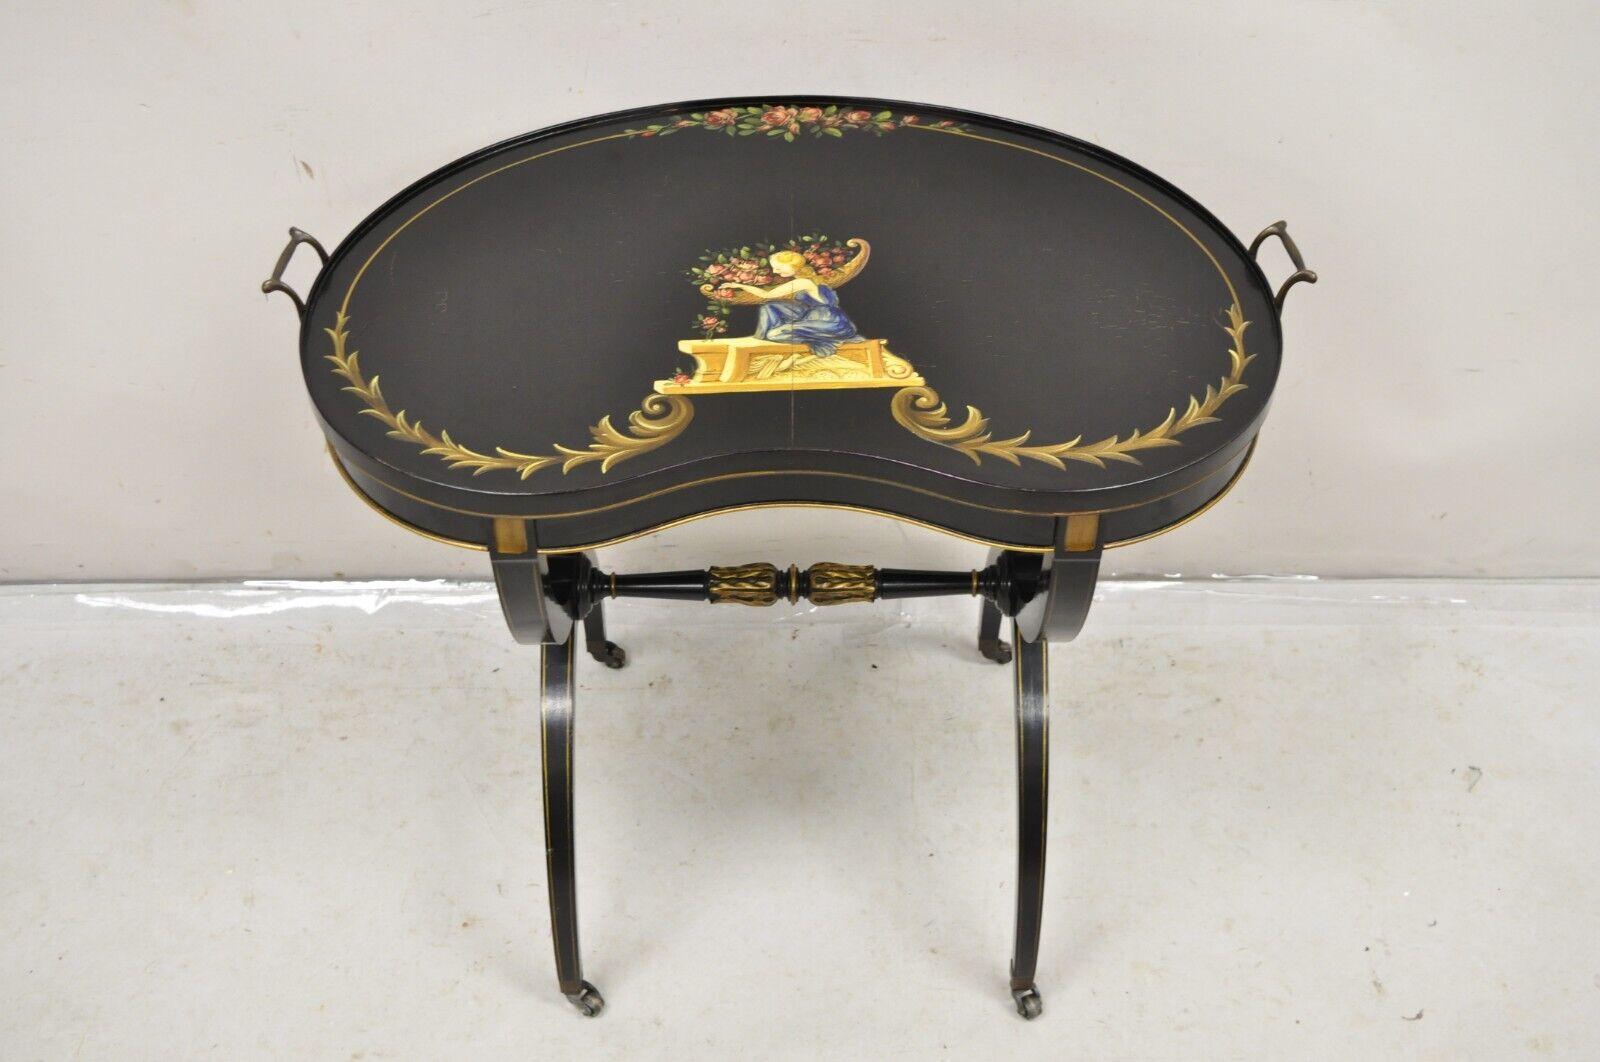 Vintage Imperial Furniture Regency Style Black Hand Painted Curule Kidney Side Table. Item features hand painted top of woman in blue dress with flowers and other gold scrollwork, brass rolling casters, kidney shaped top, brass handles, original